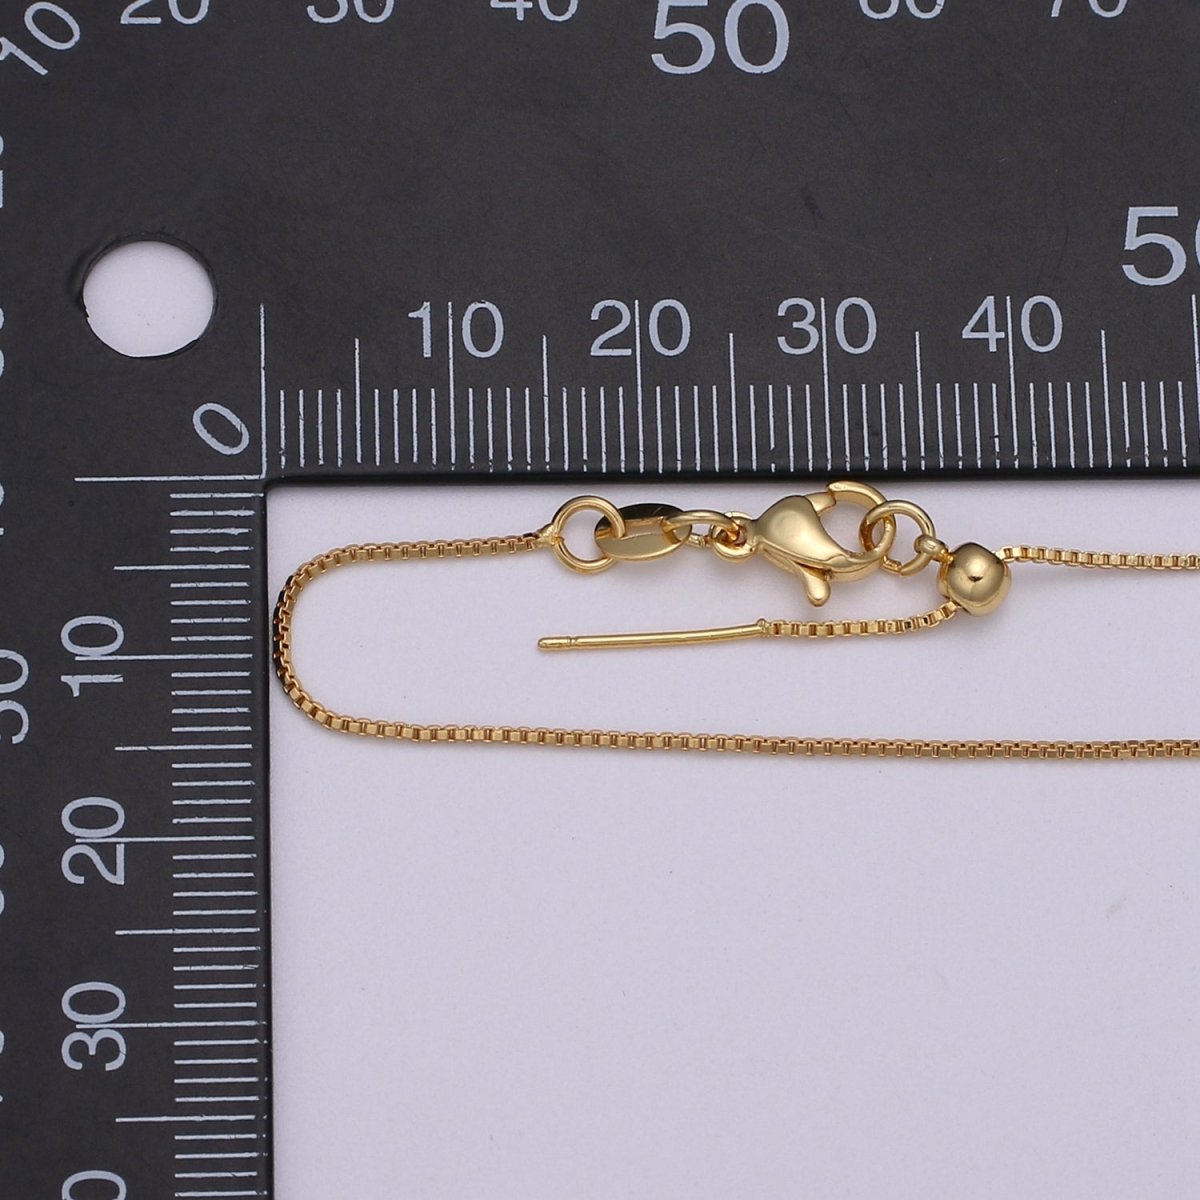 Gold Filled 0.8mm 18.5 inch long Chain with Lobster Clasp For DIY Jewelry Making Chain NECKLACE Supplies Kit L-198~L-201 - DLUXCA